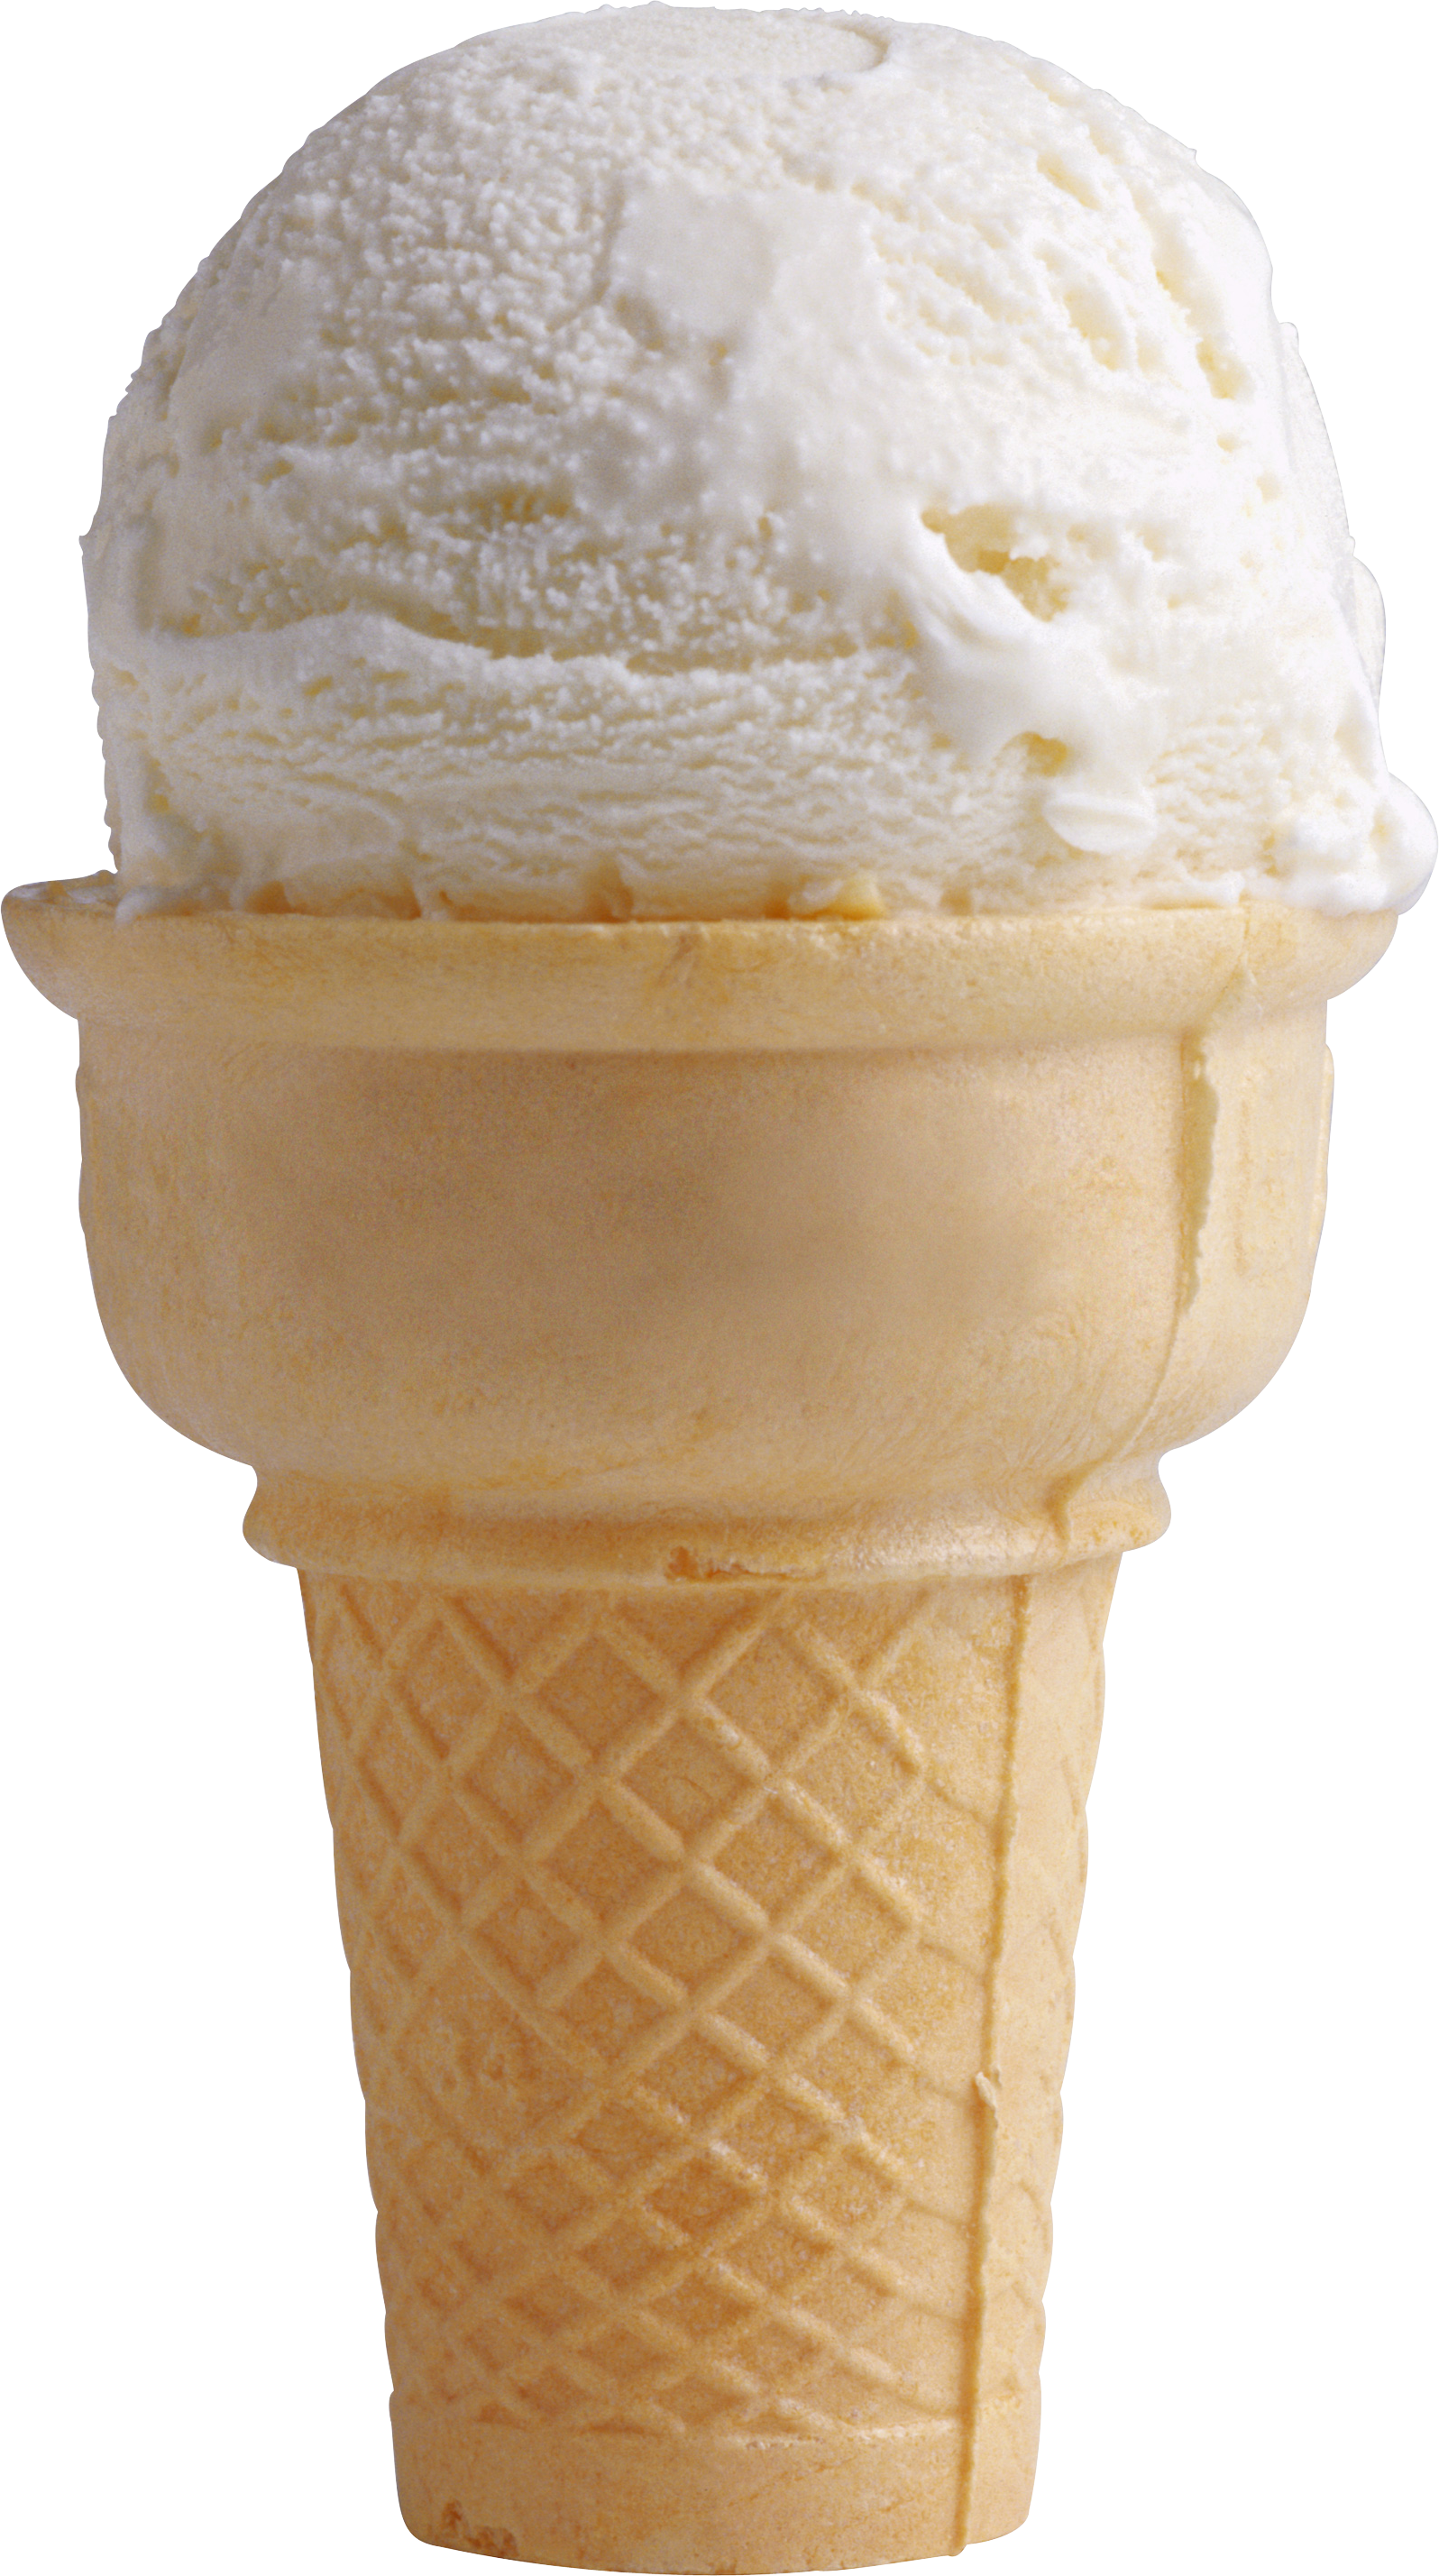 Ice Cream PNG Image - PurePNG | Free transparent CC0 PNG Image Library